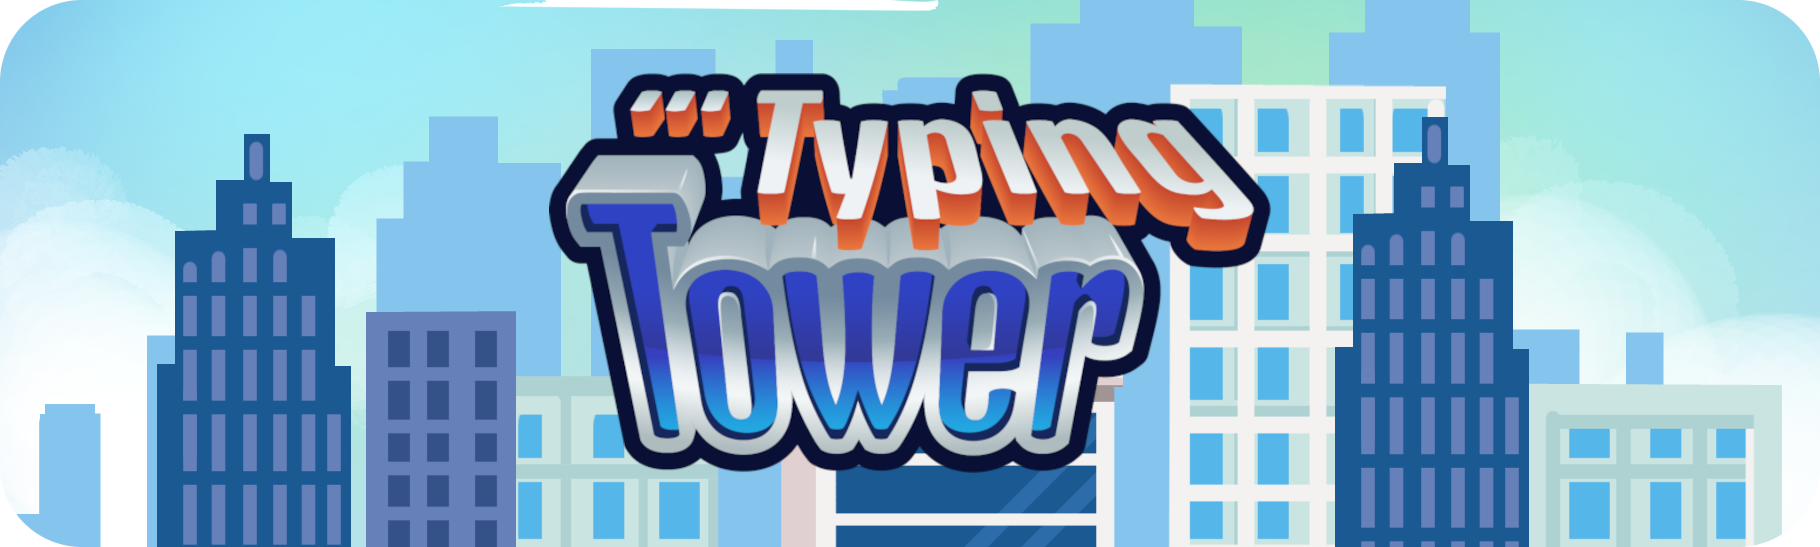 Free Educational Typing Games